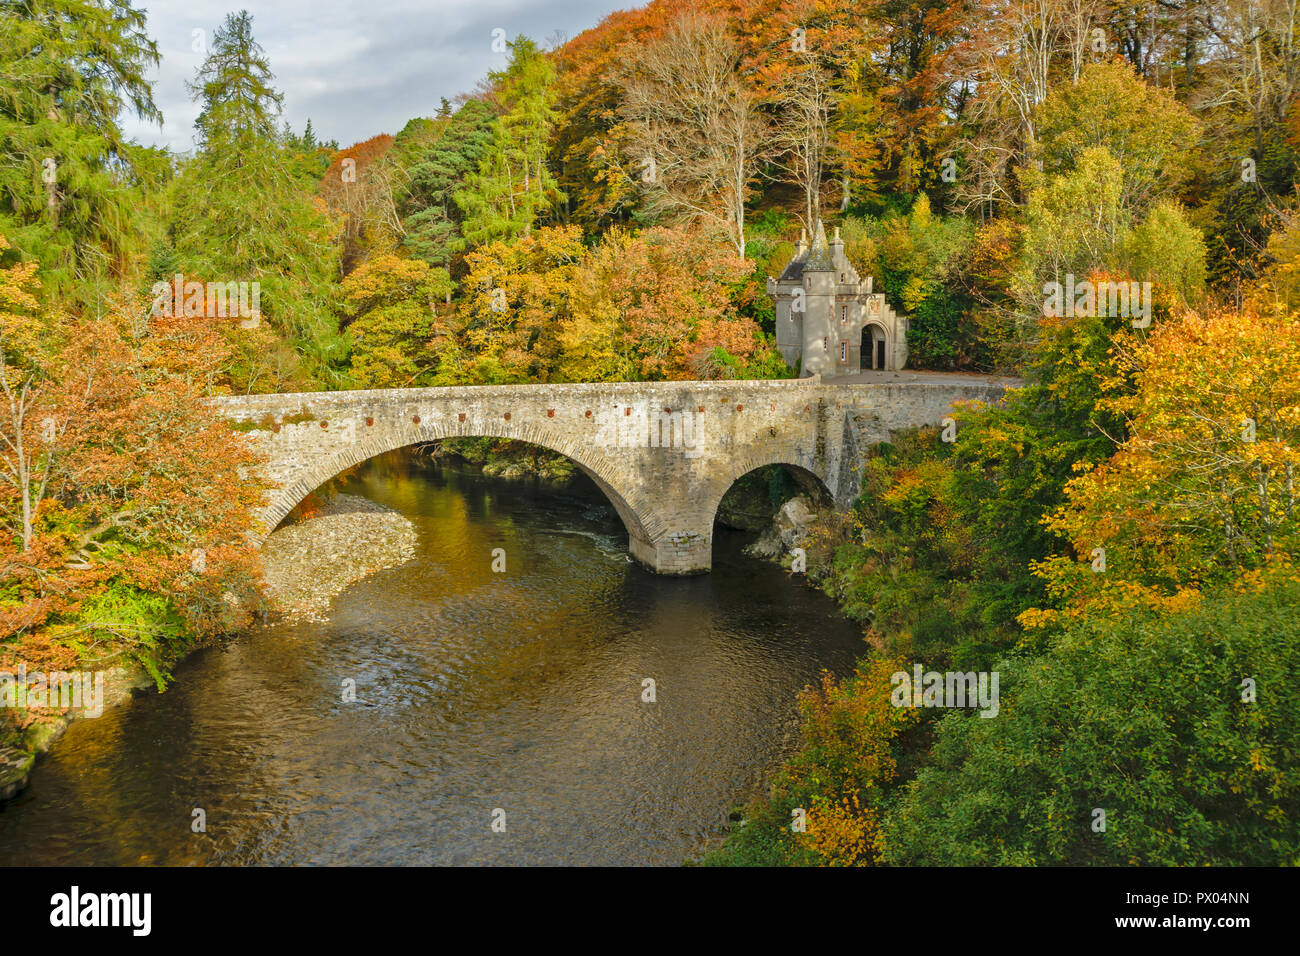 OLD BRIDGE OF AVON BALLINDALLOCH CASTLE GRAMPIAN SCOTLAND THE BRIDGE AND BARONIAL GATEHOUSE SURROUNDED BY AUTUMN LEAVES AND COLOUR Stock Photo